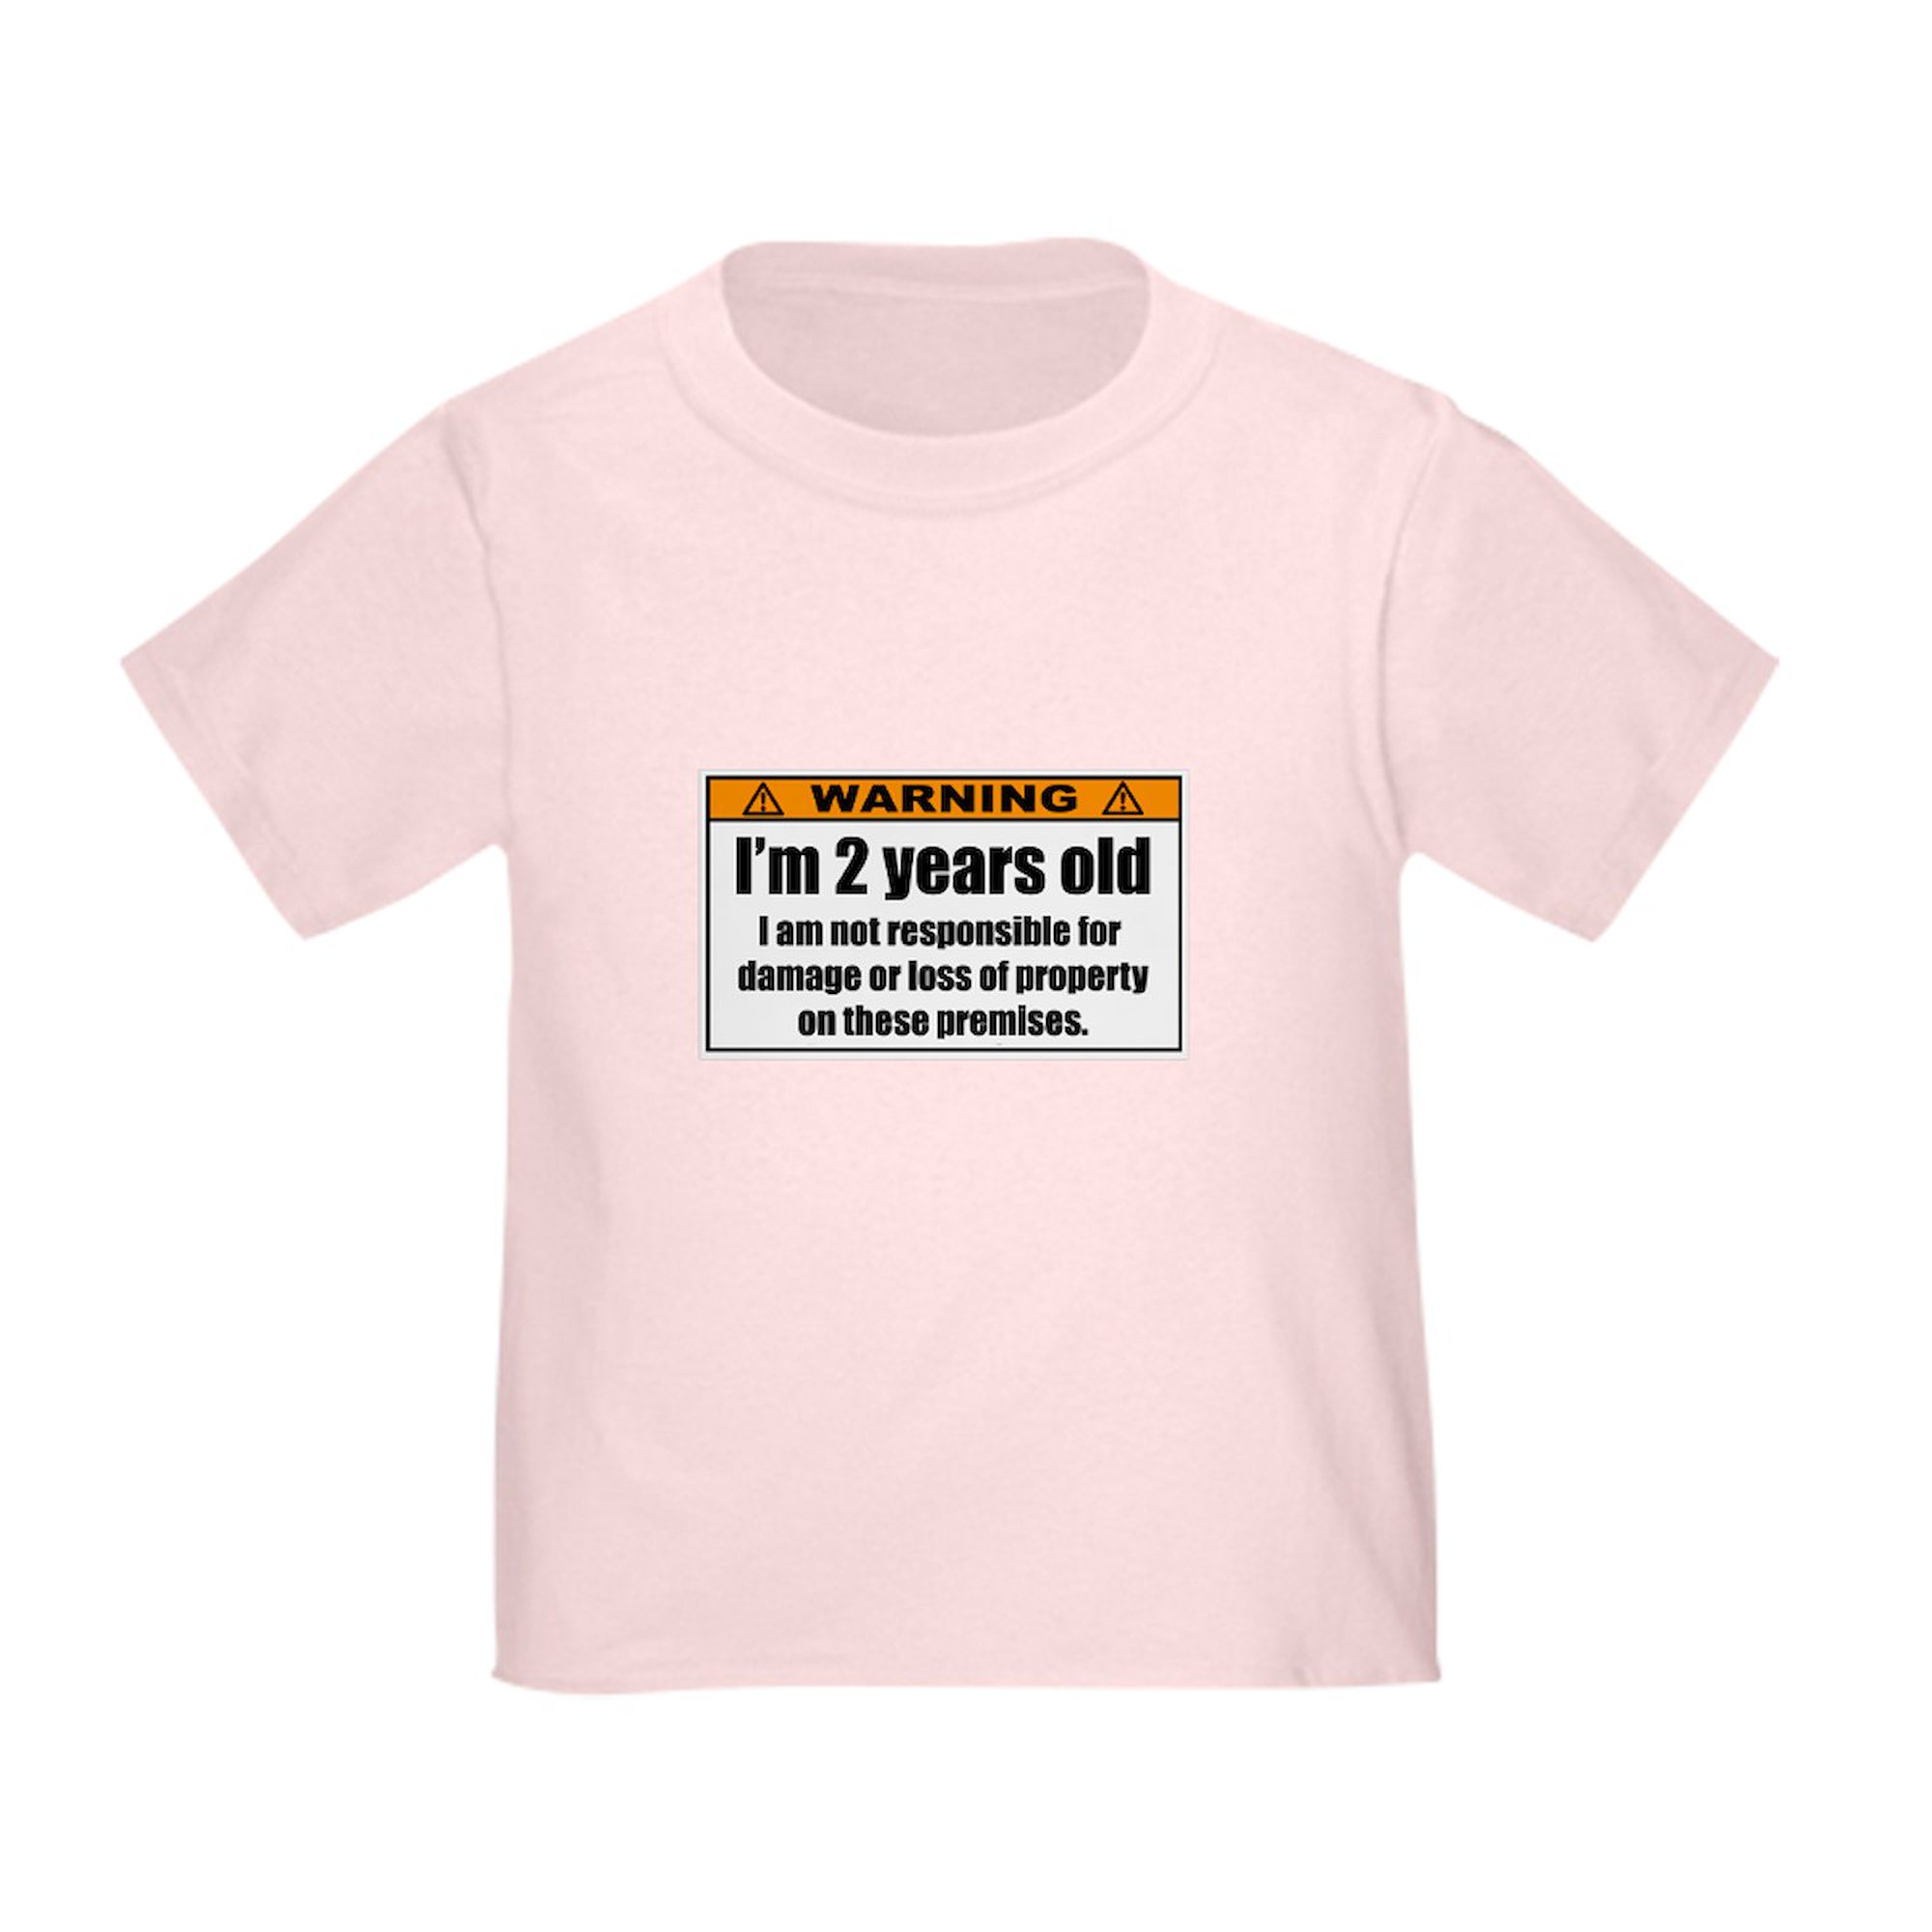 CafePress - Funny Warning: I'm 2 Years Old T Shirt - Cute Toddler T-Shirt, 100% Cotton - image 1 of 4